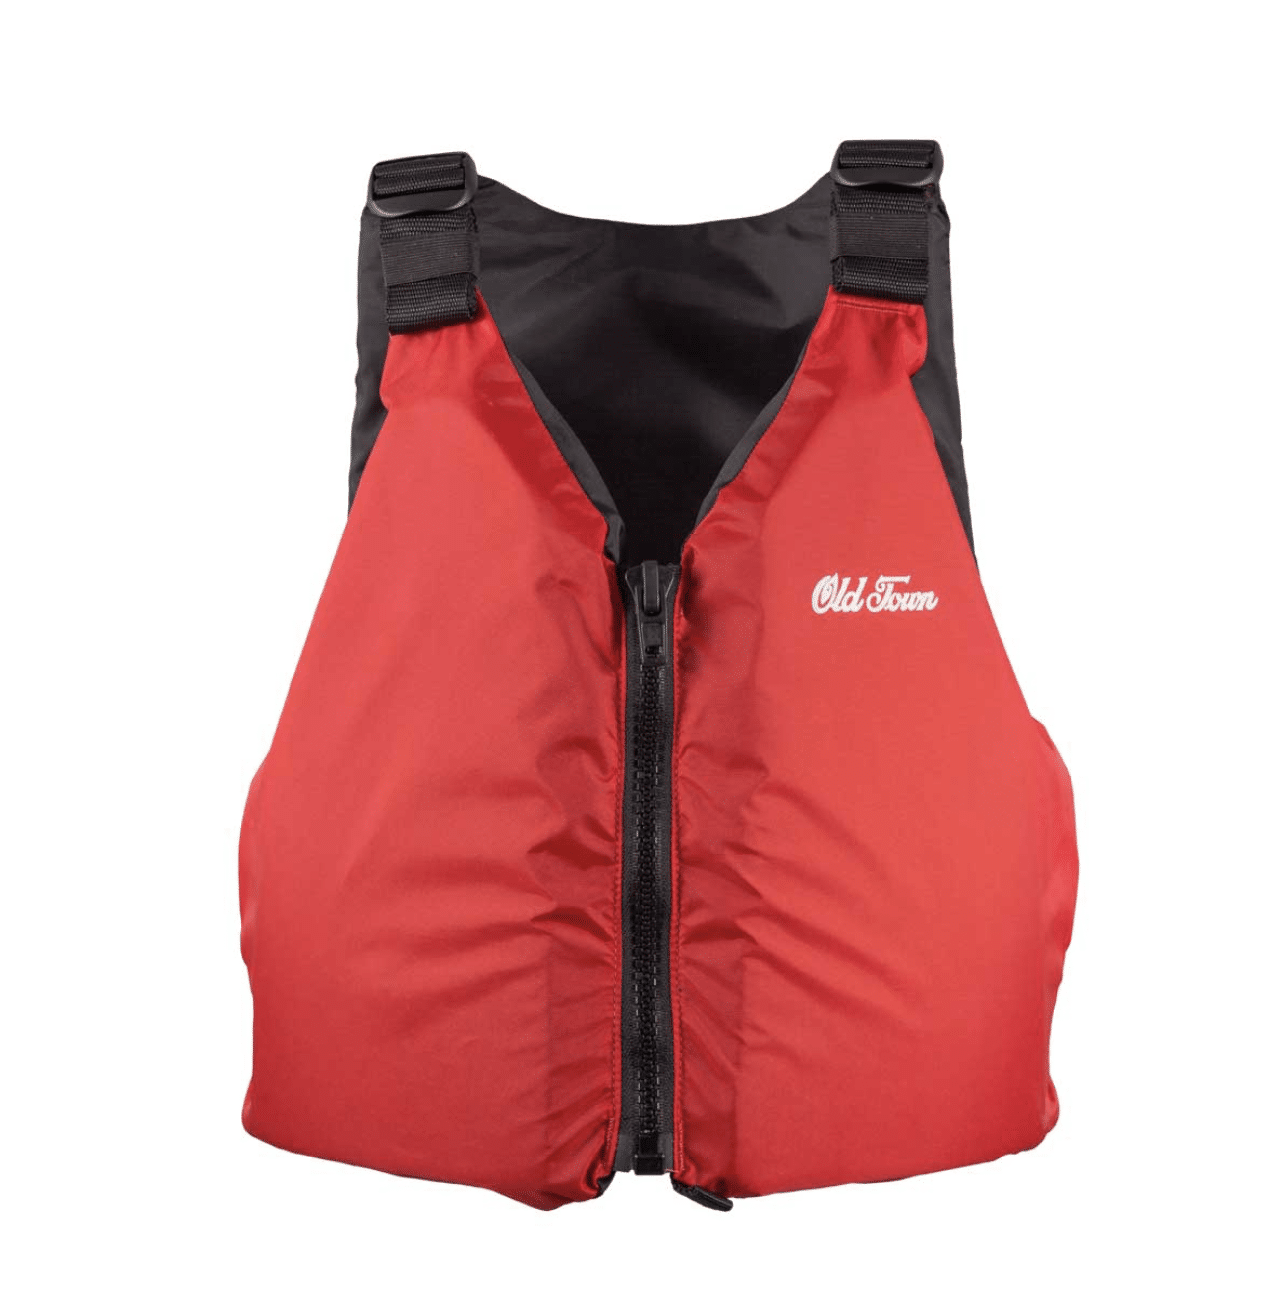 Outfitter Universal Life Jacket